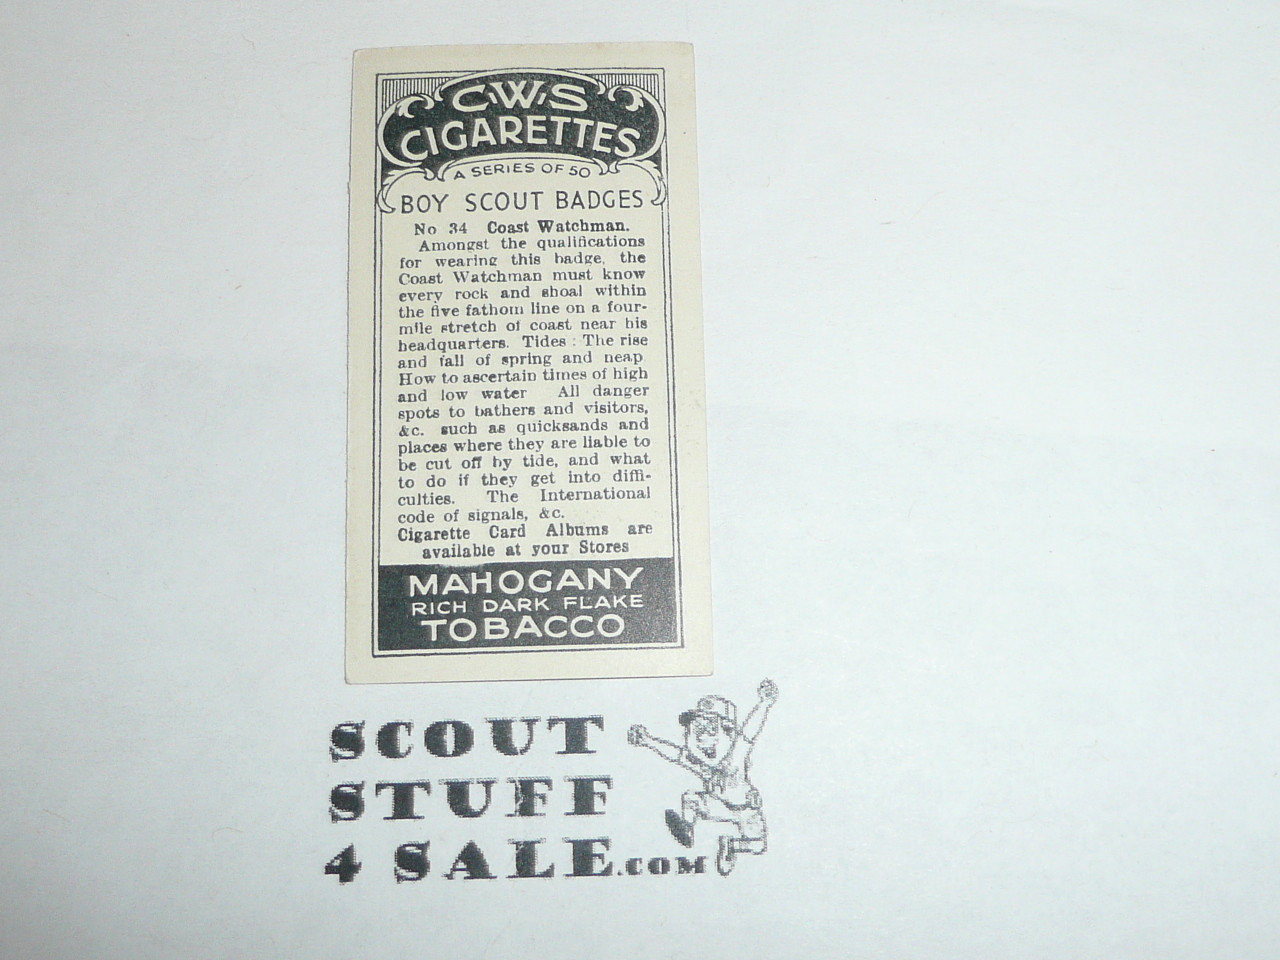 CWS Cigarette Company Premium Card, Boy Scout Badges Series of 50, Card #34 Coast Watchman, 1939